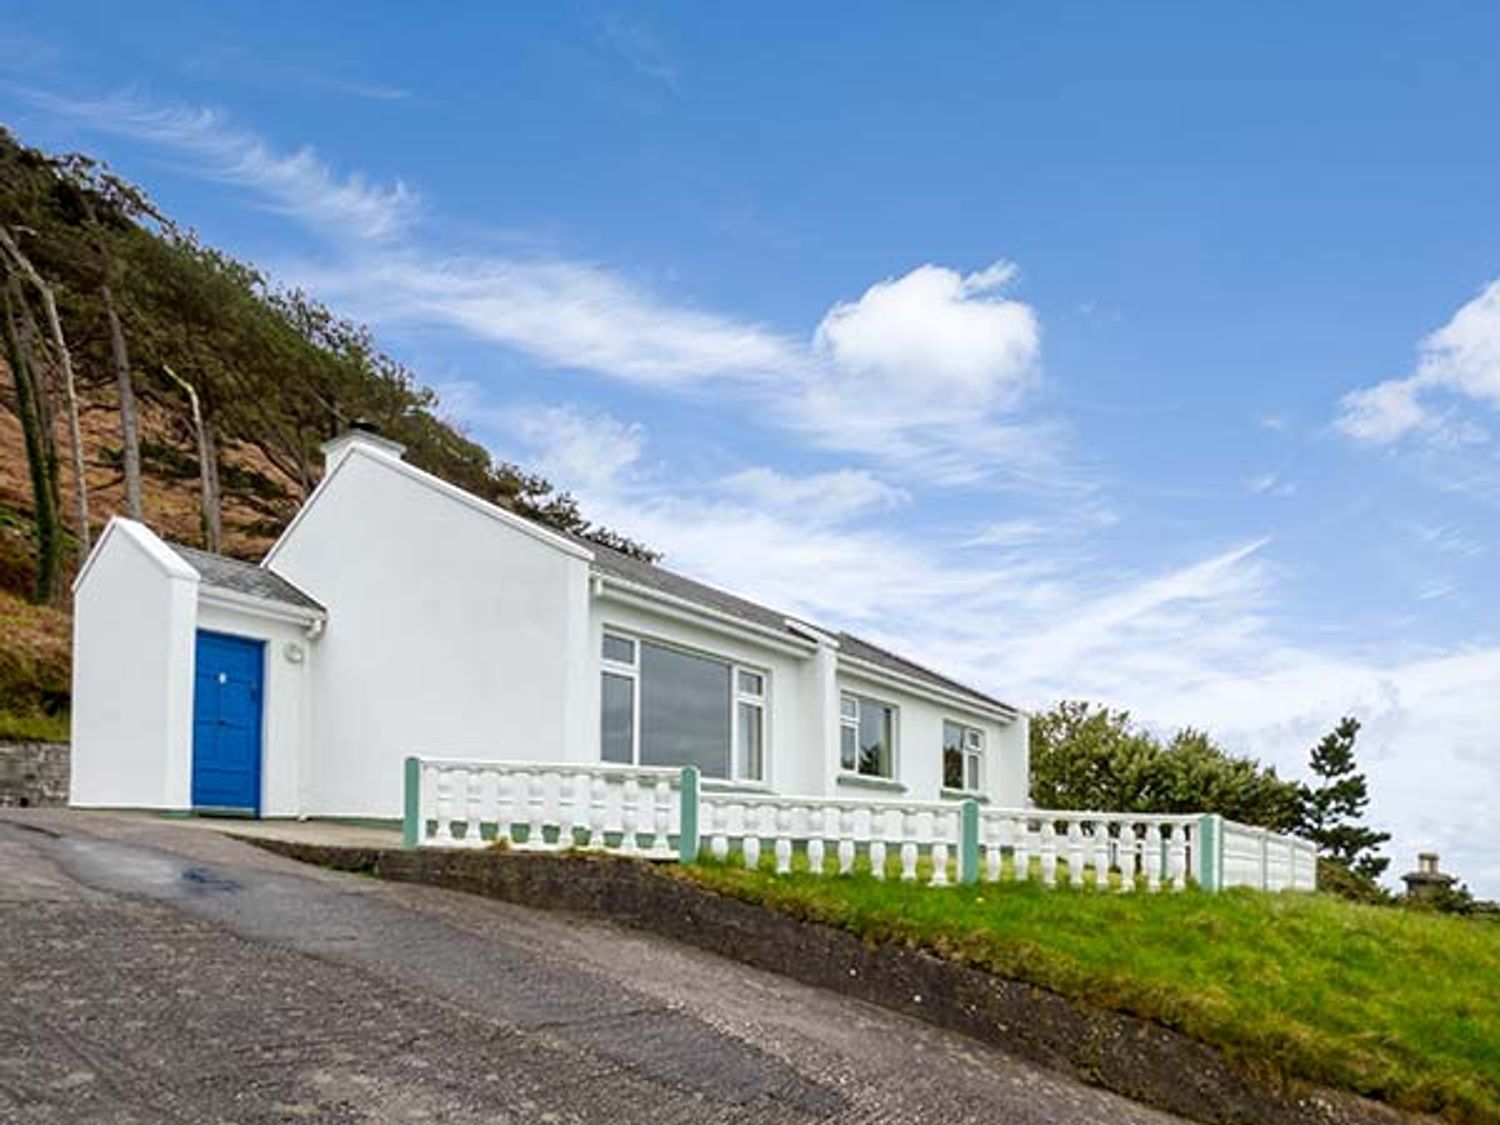 Rossbeigh Beach Cottage No 4 - County Kerry - 1067715 - photo 1